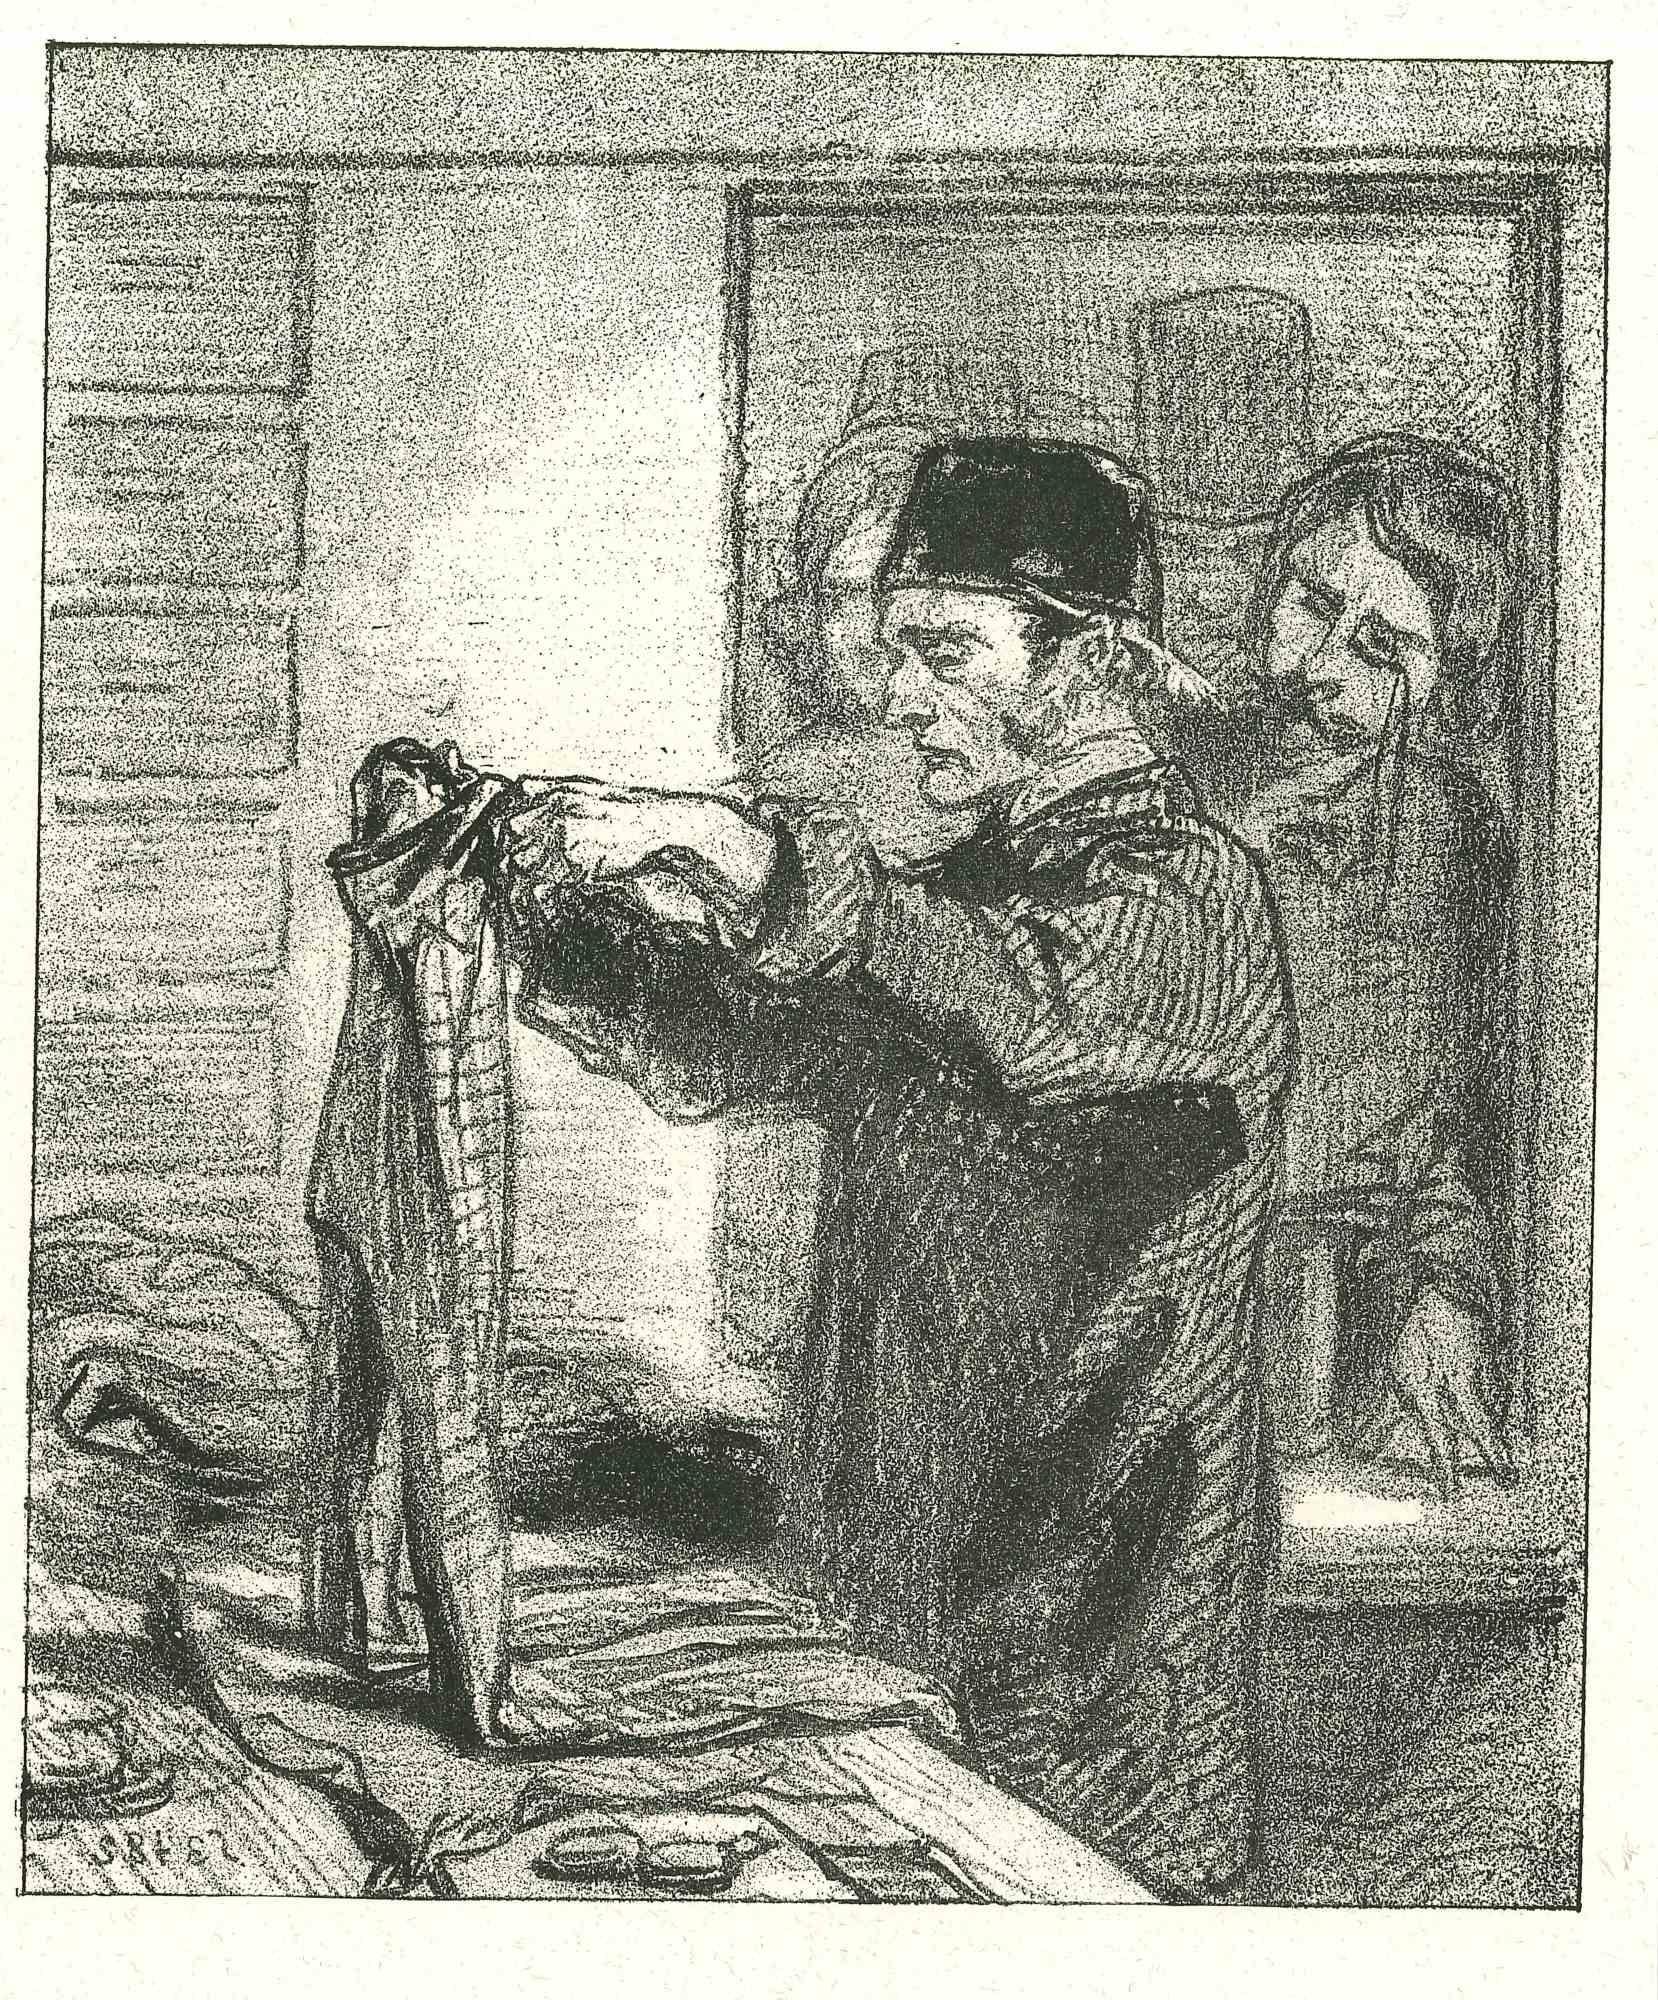 The tailor is an original lithograph artwork on ivory-colored paper, realized by the French draftsman Paul Gavarni (after) (alias Guillaume Sulpice Chevalier Gavarni, 1804-1866) in Paris, 1881, in the collection of Illustrations for "La Mascarade